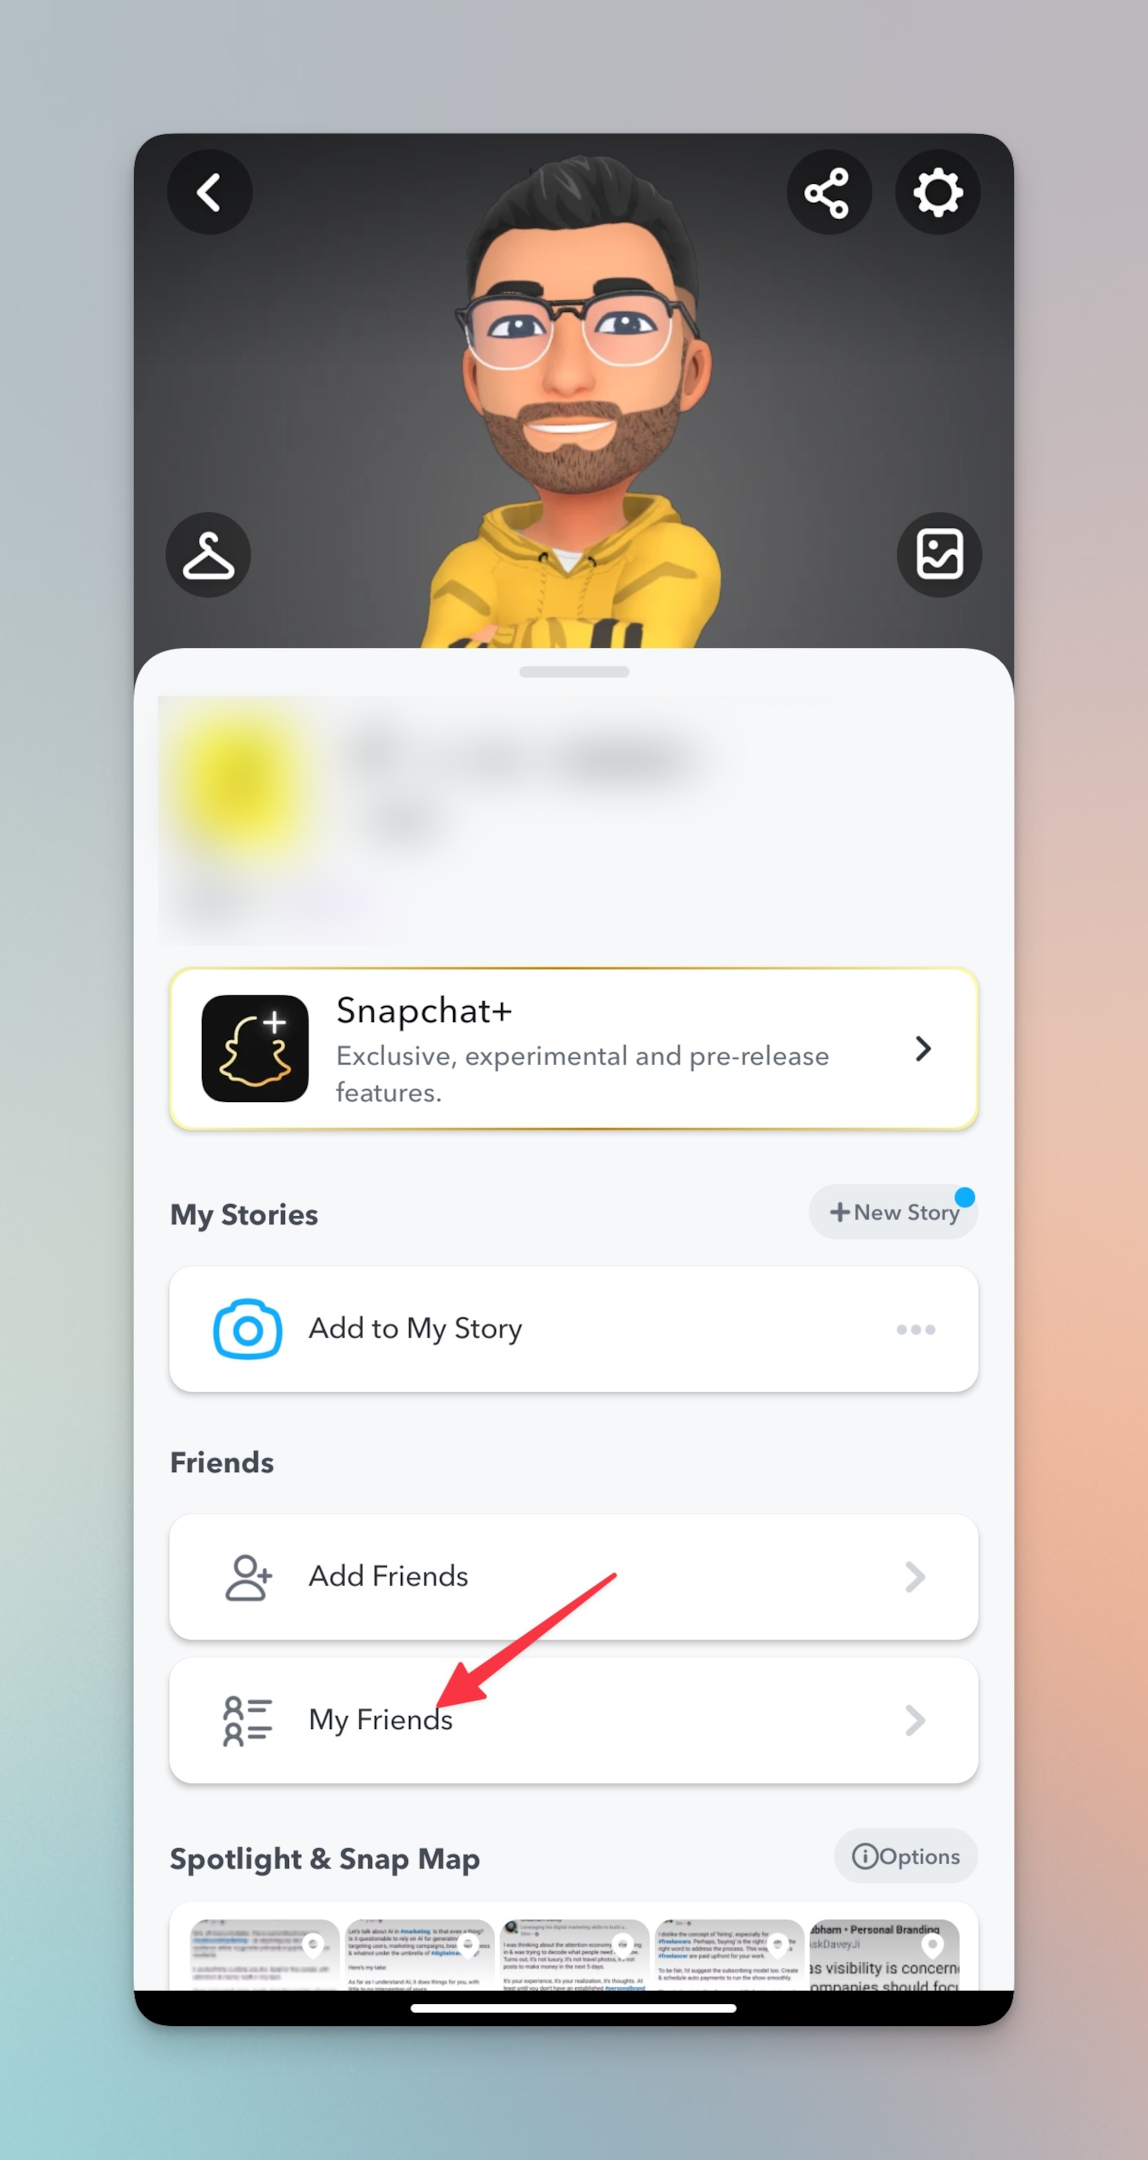 Remote.tools shows to tap on My Friends to view the friends list and remove someone as friend